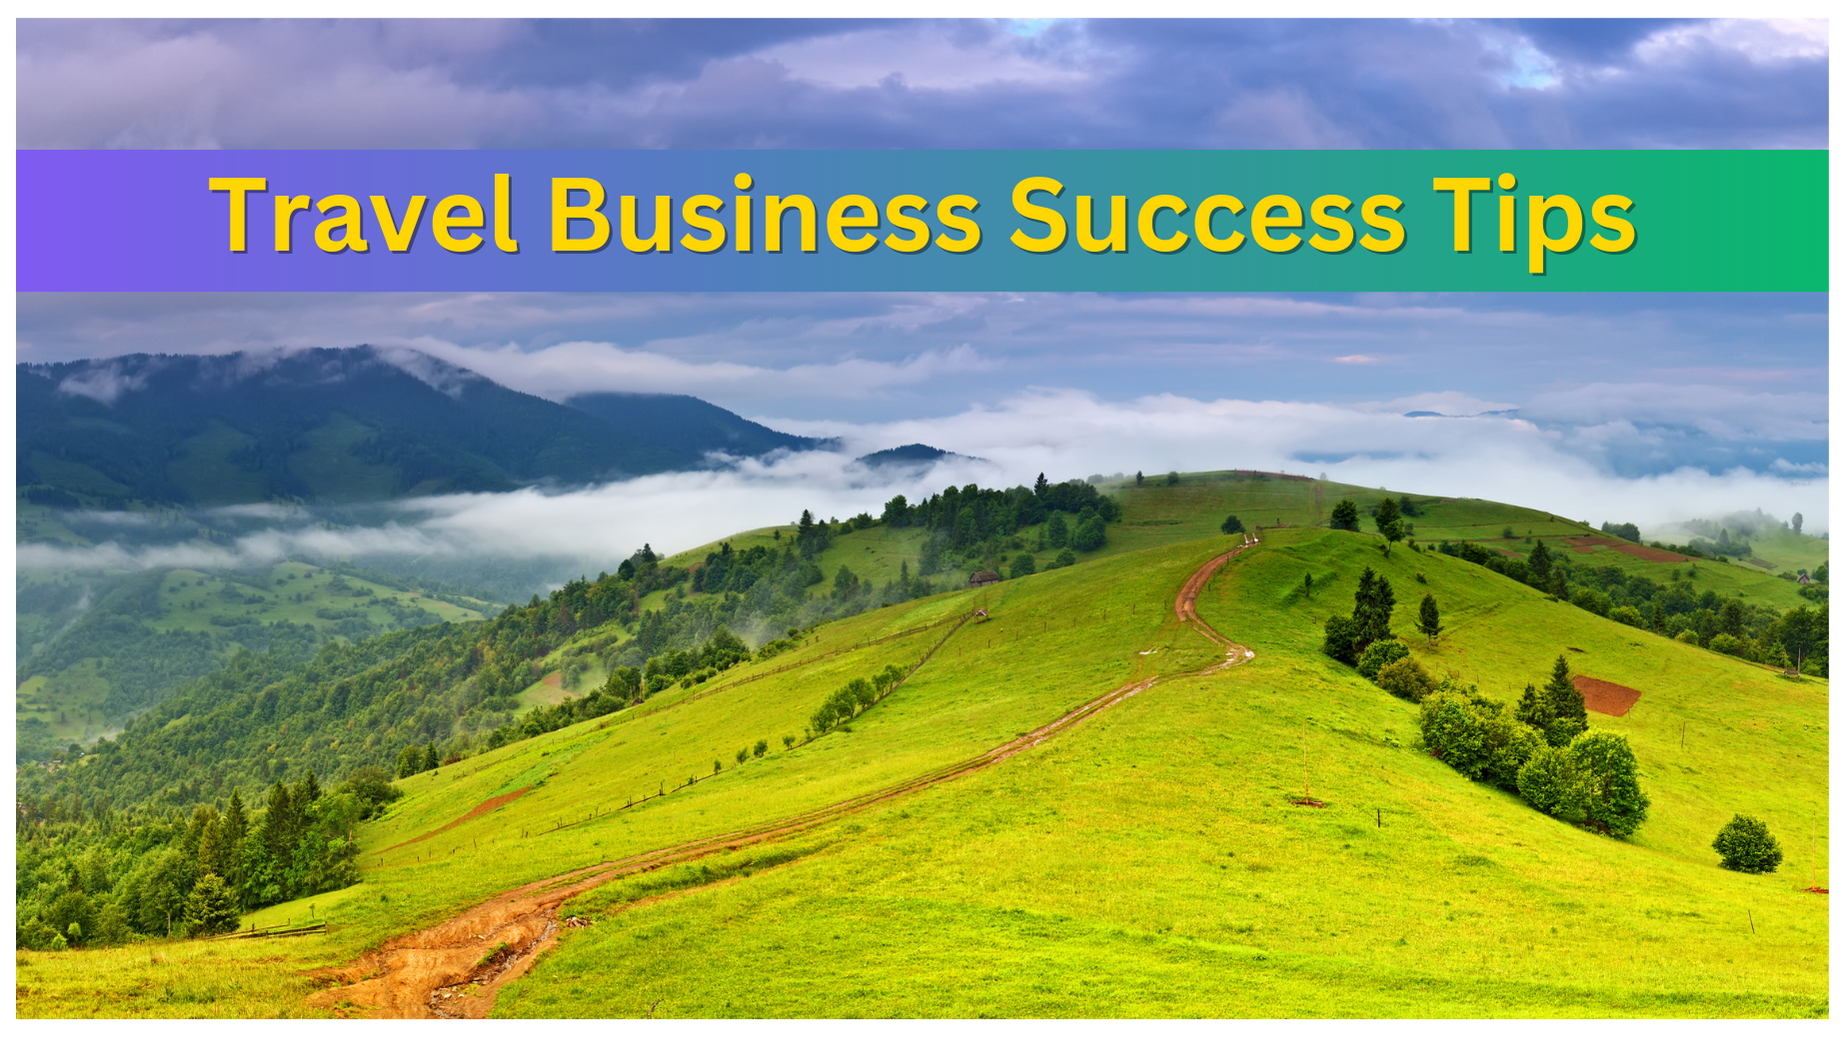 SEO Marketing: A Key Strategy for Growing Your Travel Business Online